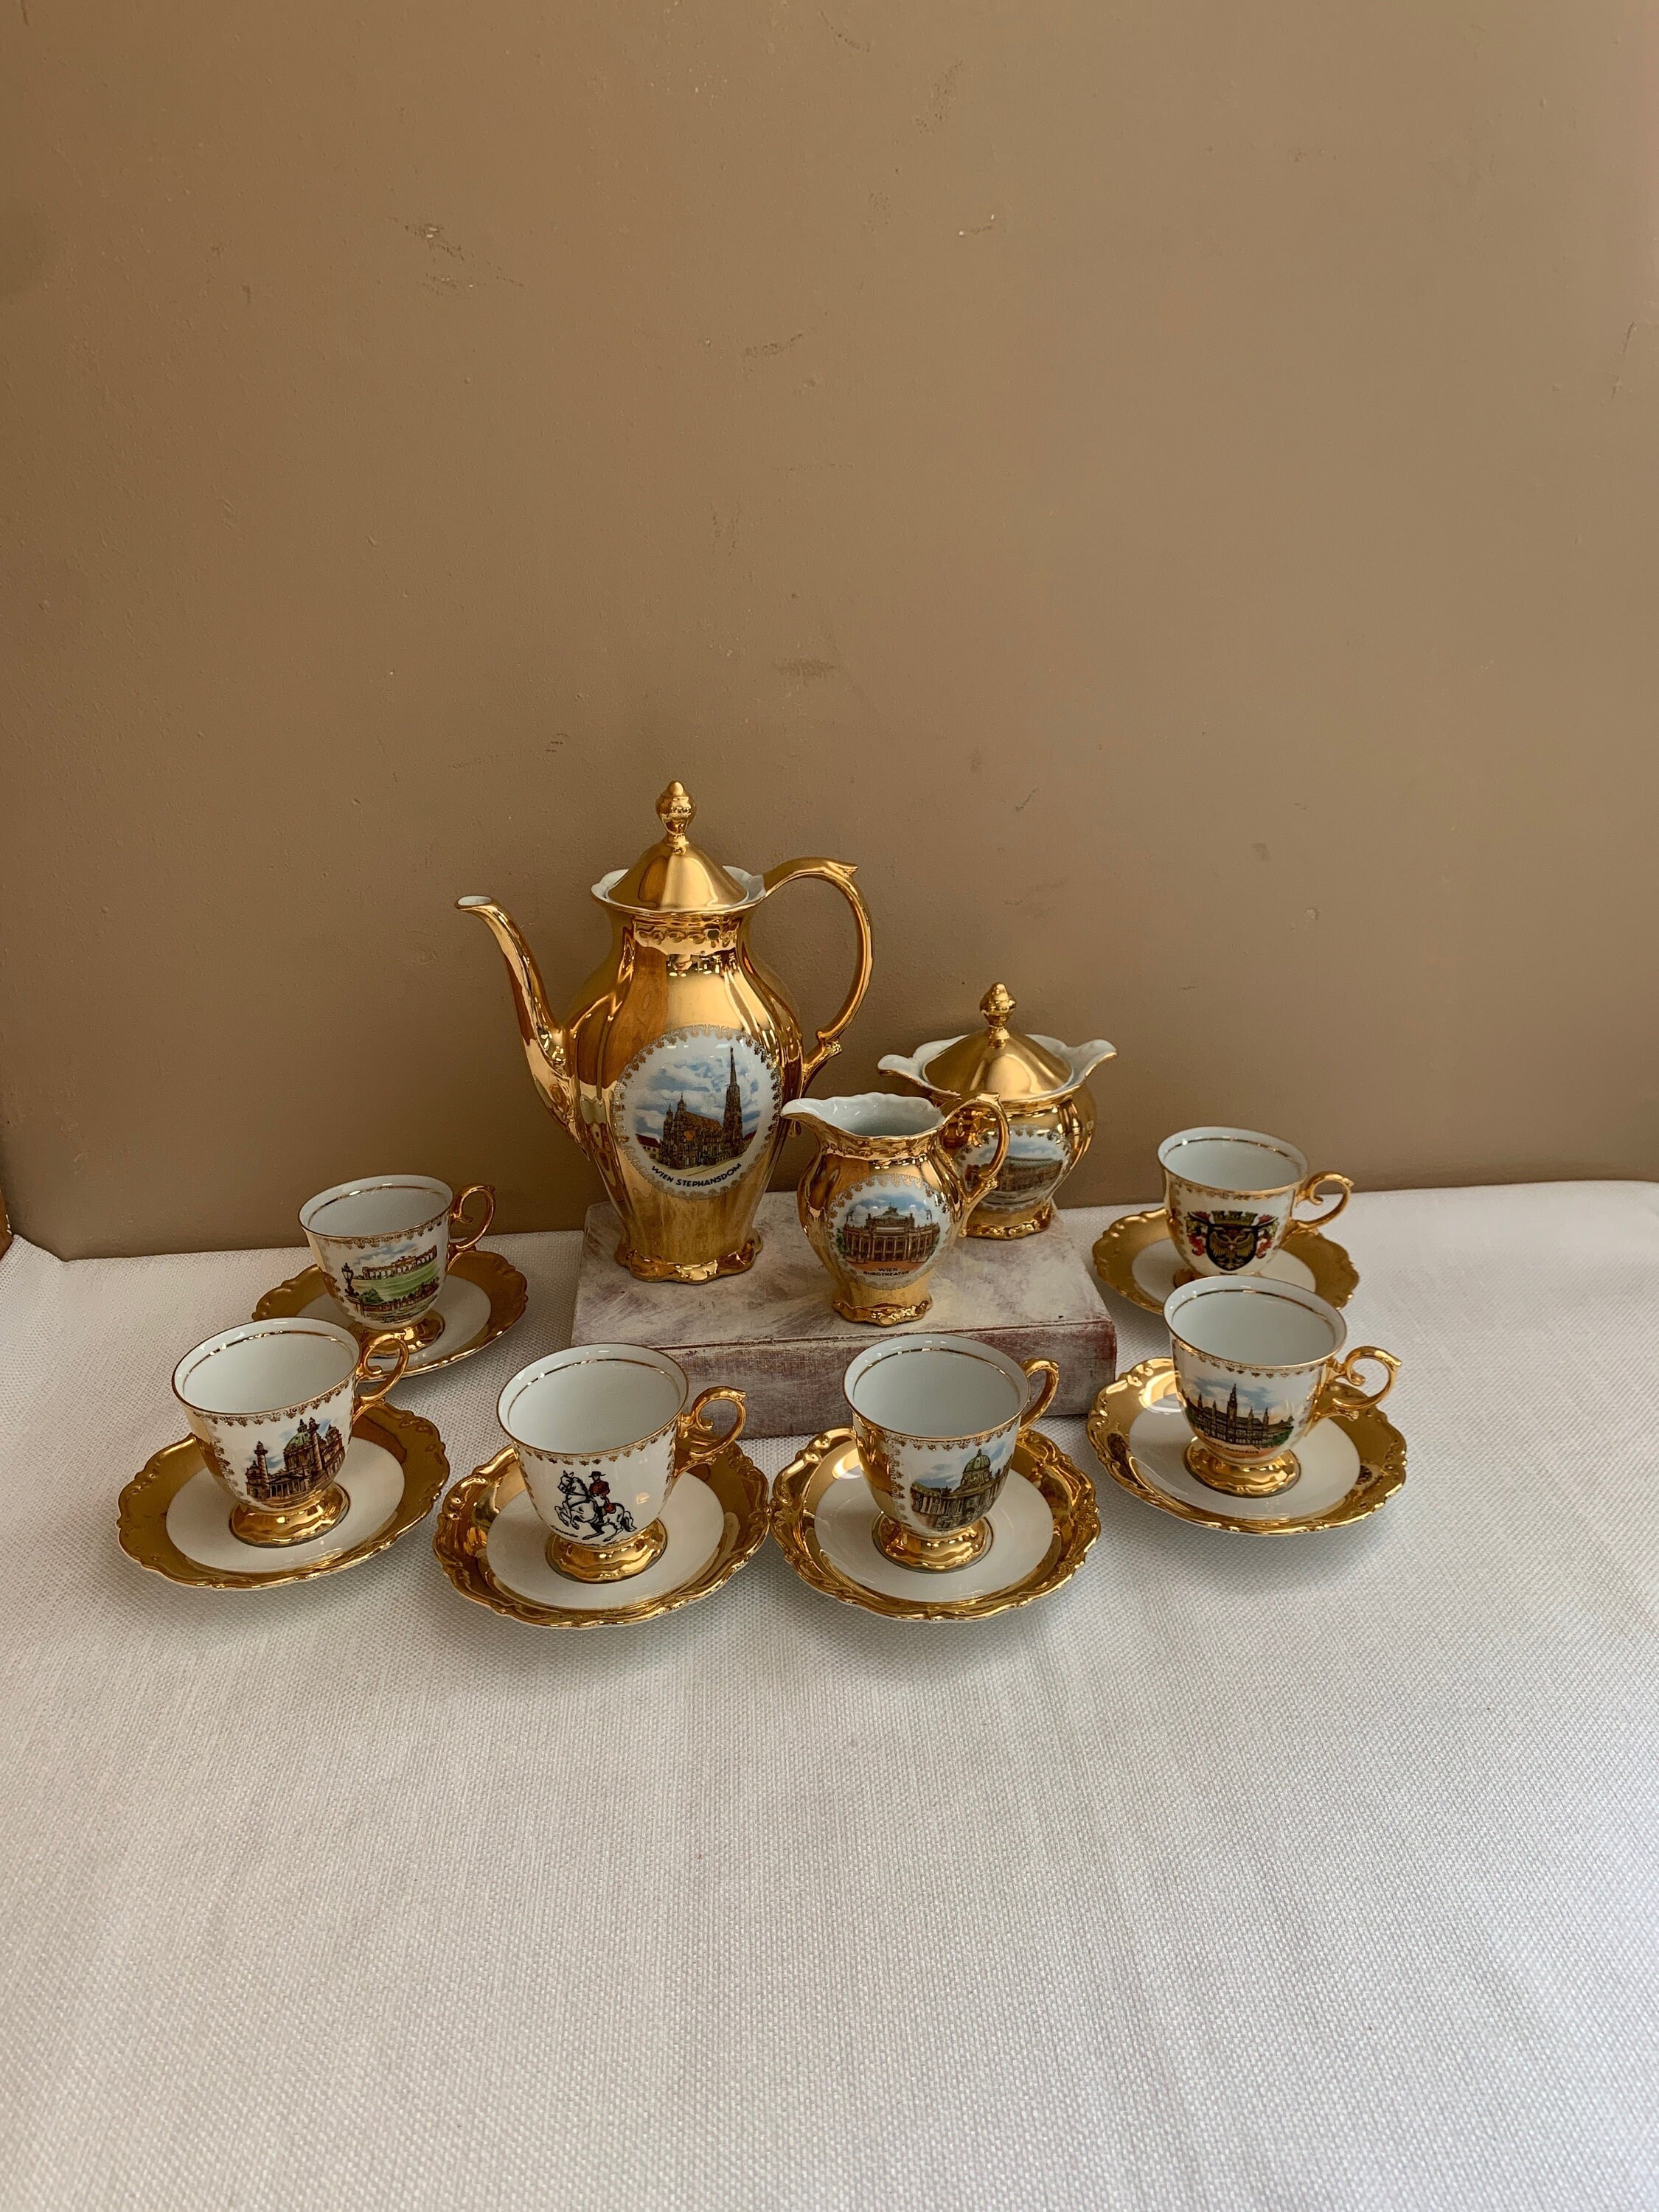 Wien Six and for Coffee Saucers, Etsy Tea 6, Porcelain With Vintage or - Bavarian Cups Demitasse Gold With Ceramic Vienna Pictures Set